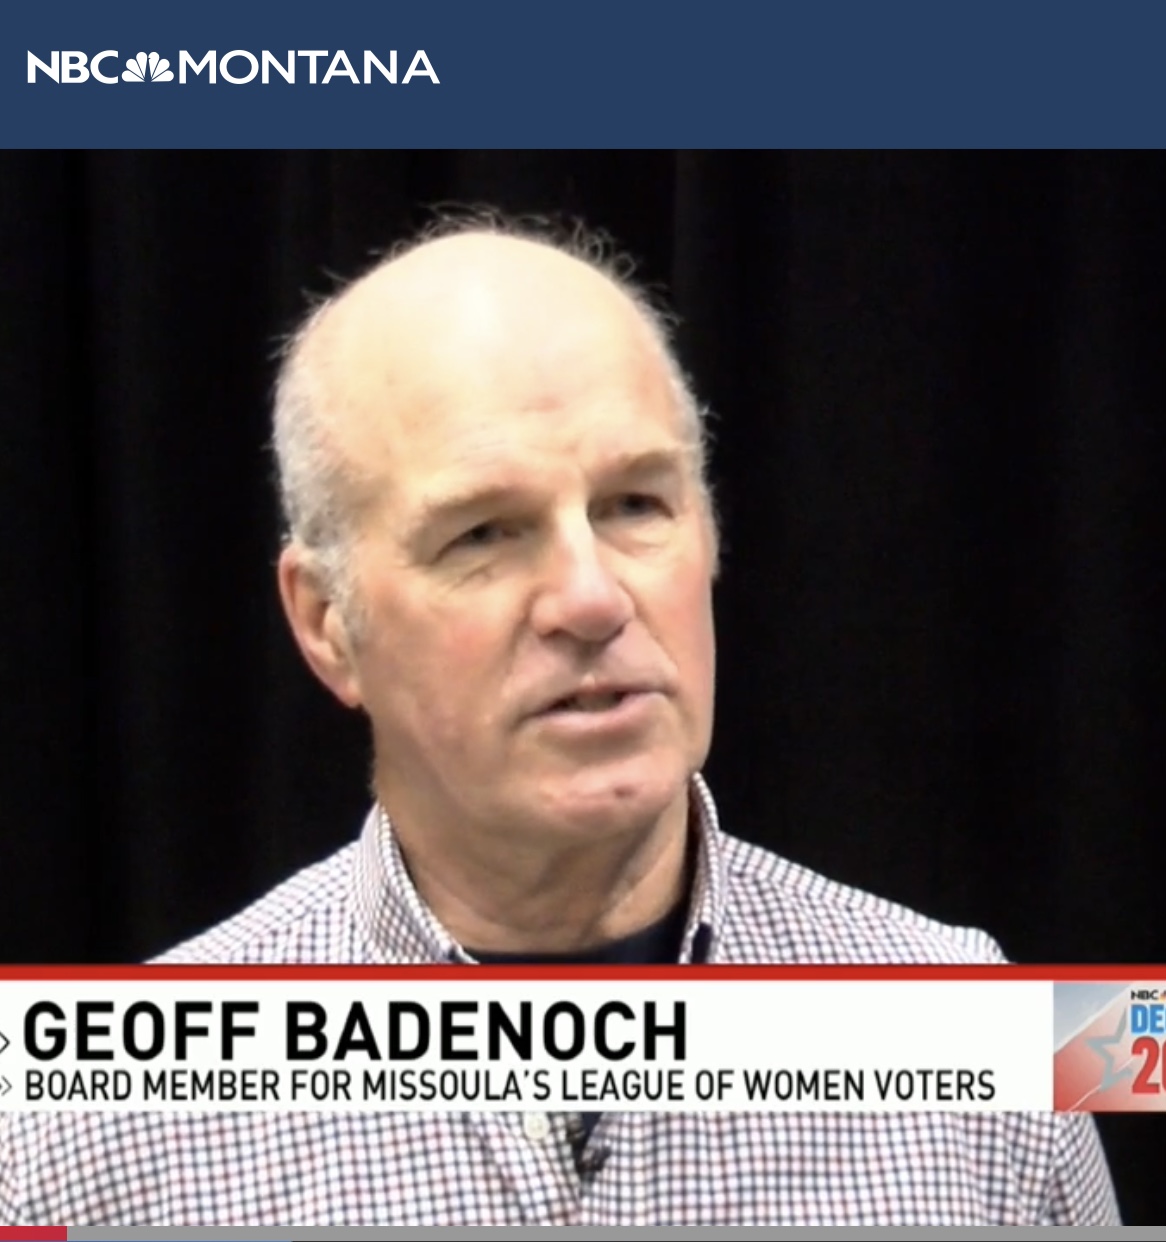 Photo of Geoff Badenoch as seen on NBC Broadcast of interview